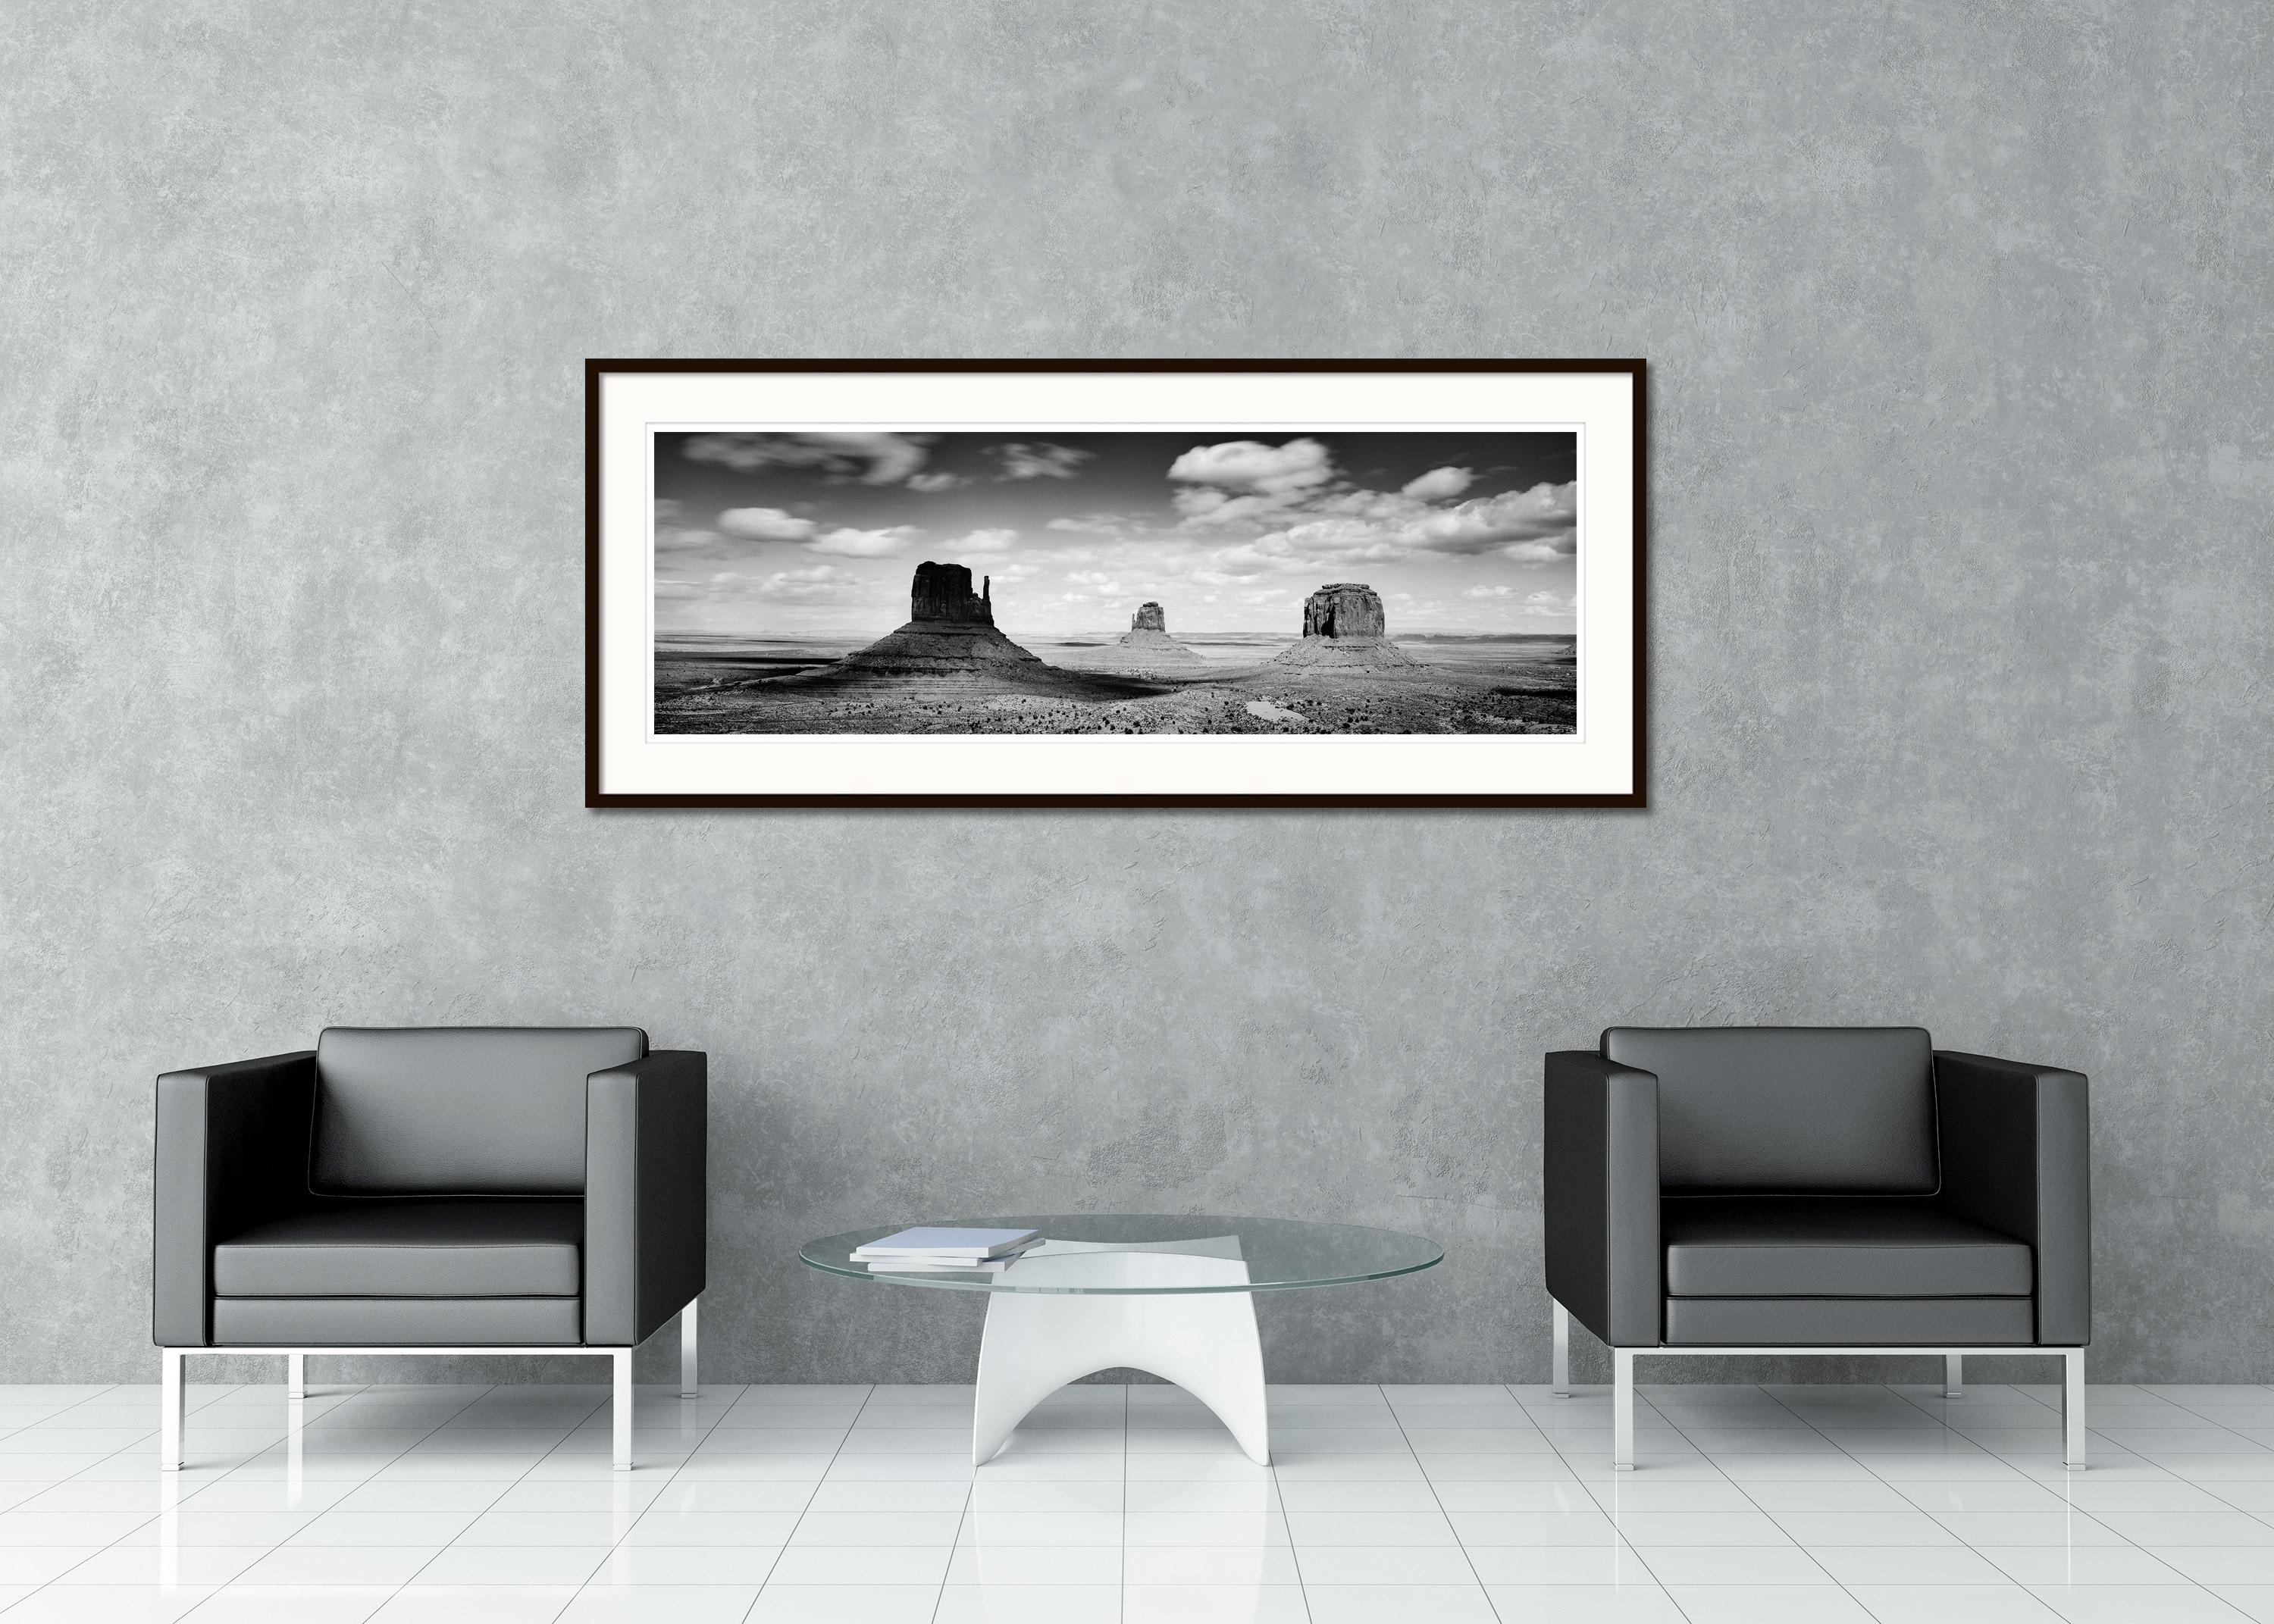 Black and white fine art panorama landscape photography. Monument Valley the famous rocks in the Mojave Desert with beautiful clouds, Navajo Tribal Park, USA. Archival pigment ink print, edition of 9. Signed, titled, dated and numbered by artist.